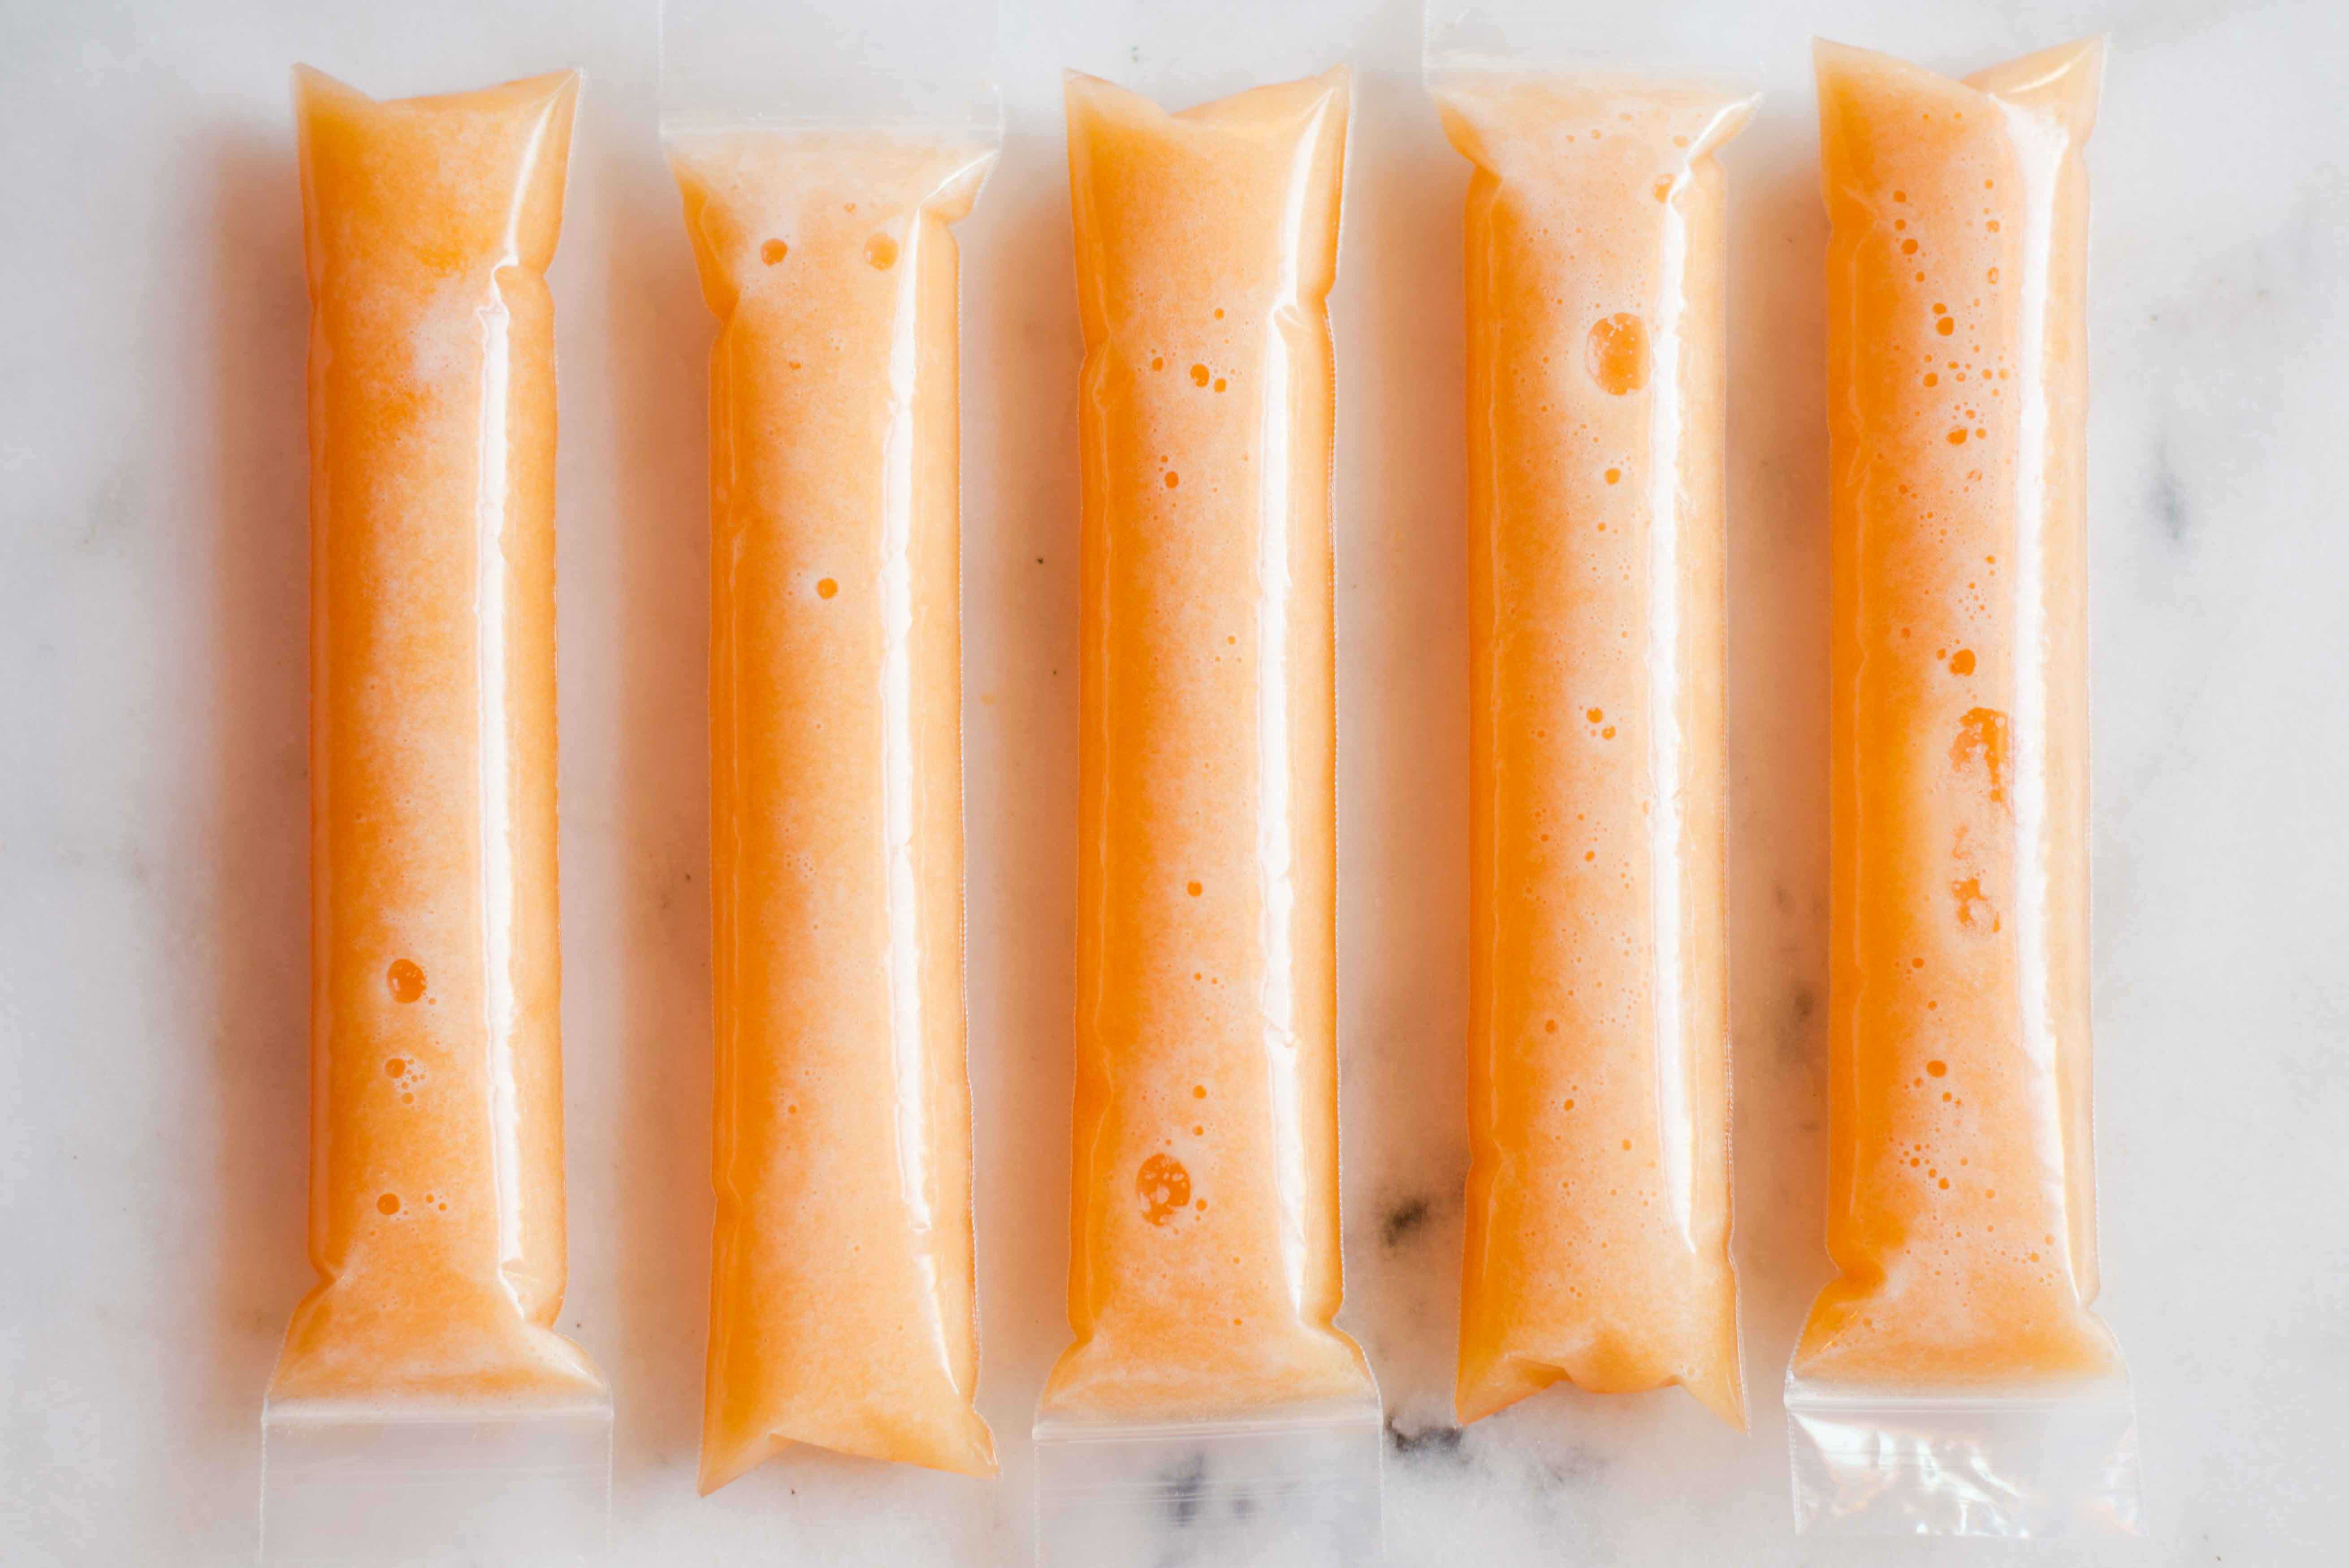 Pureed sugar kiss melons in ice pop wrappers, ready to be placed into the freezer.